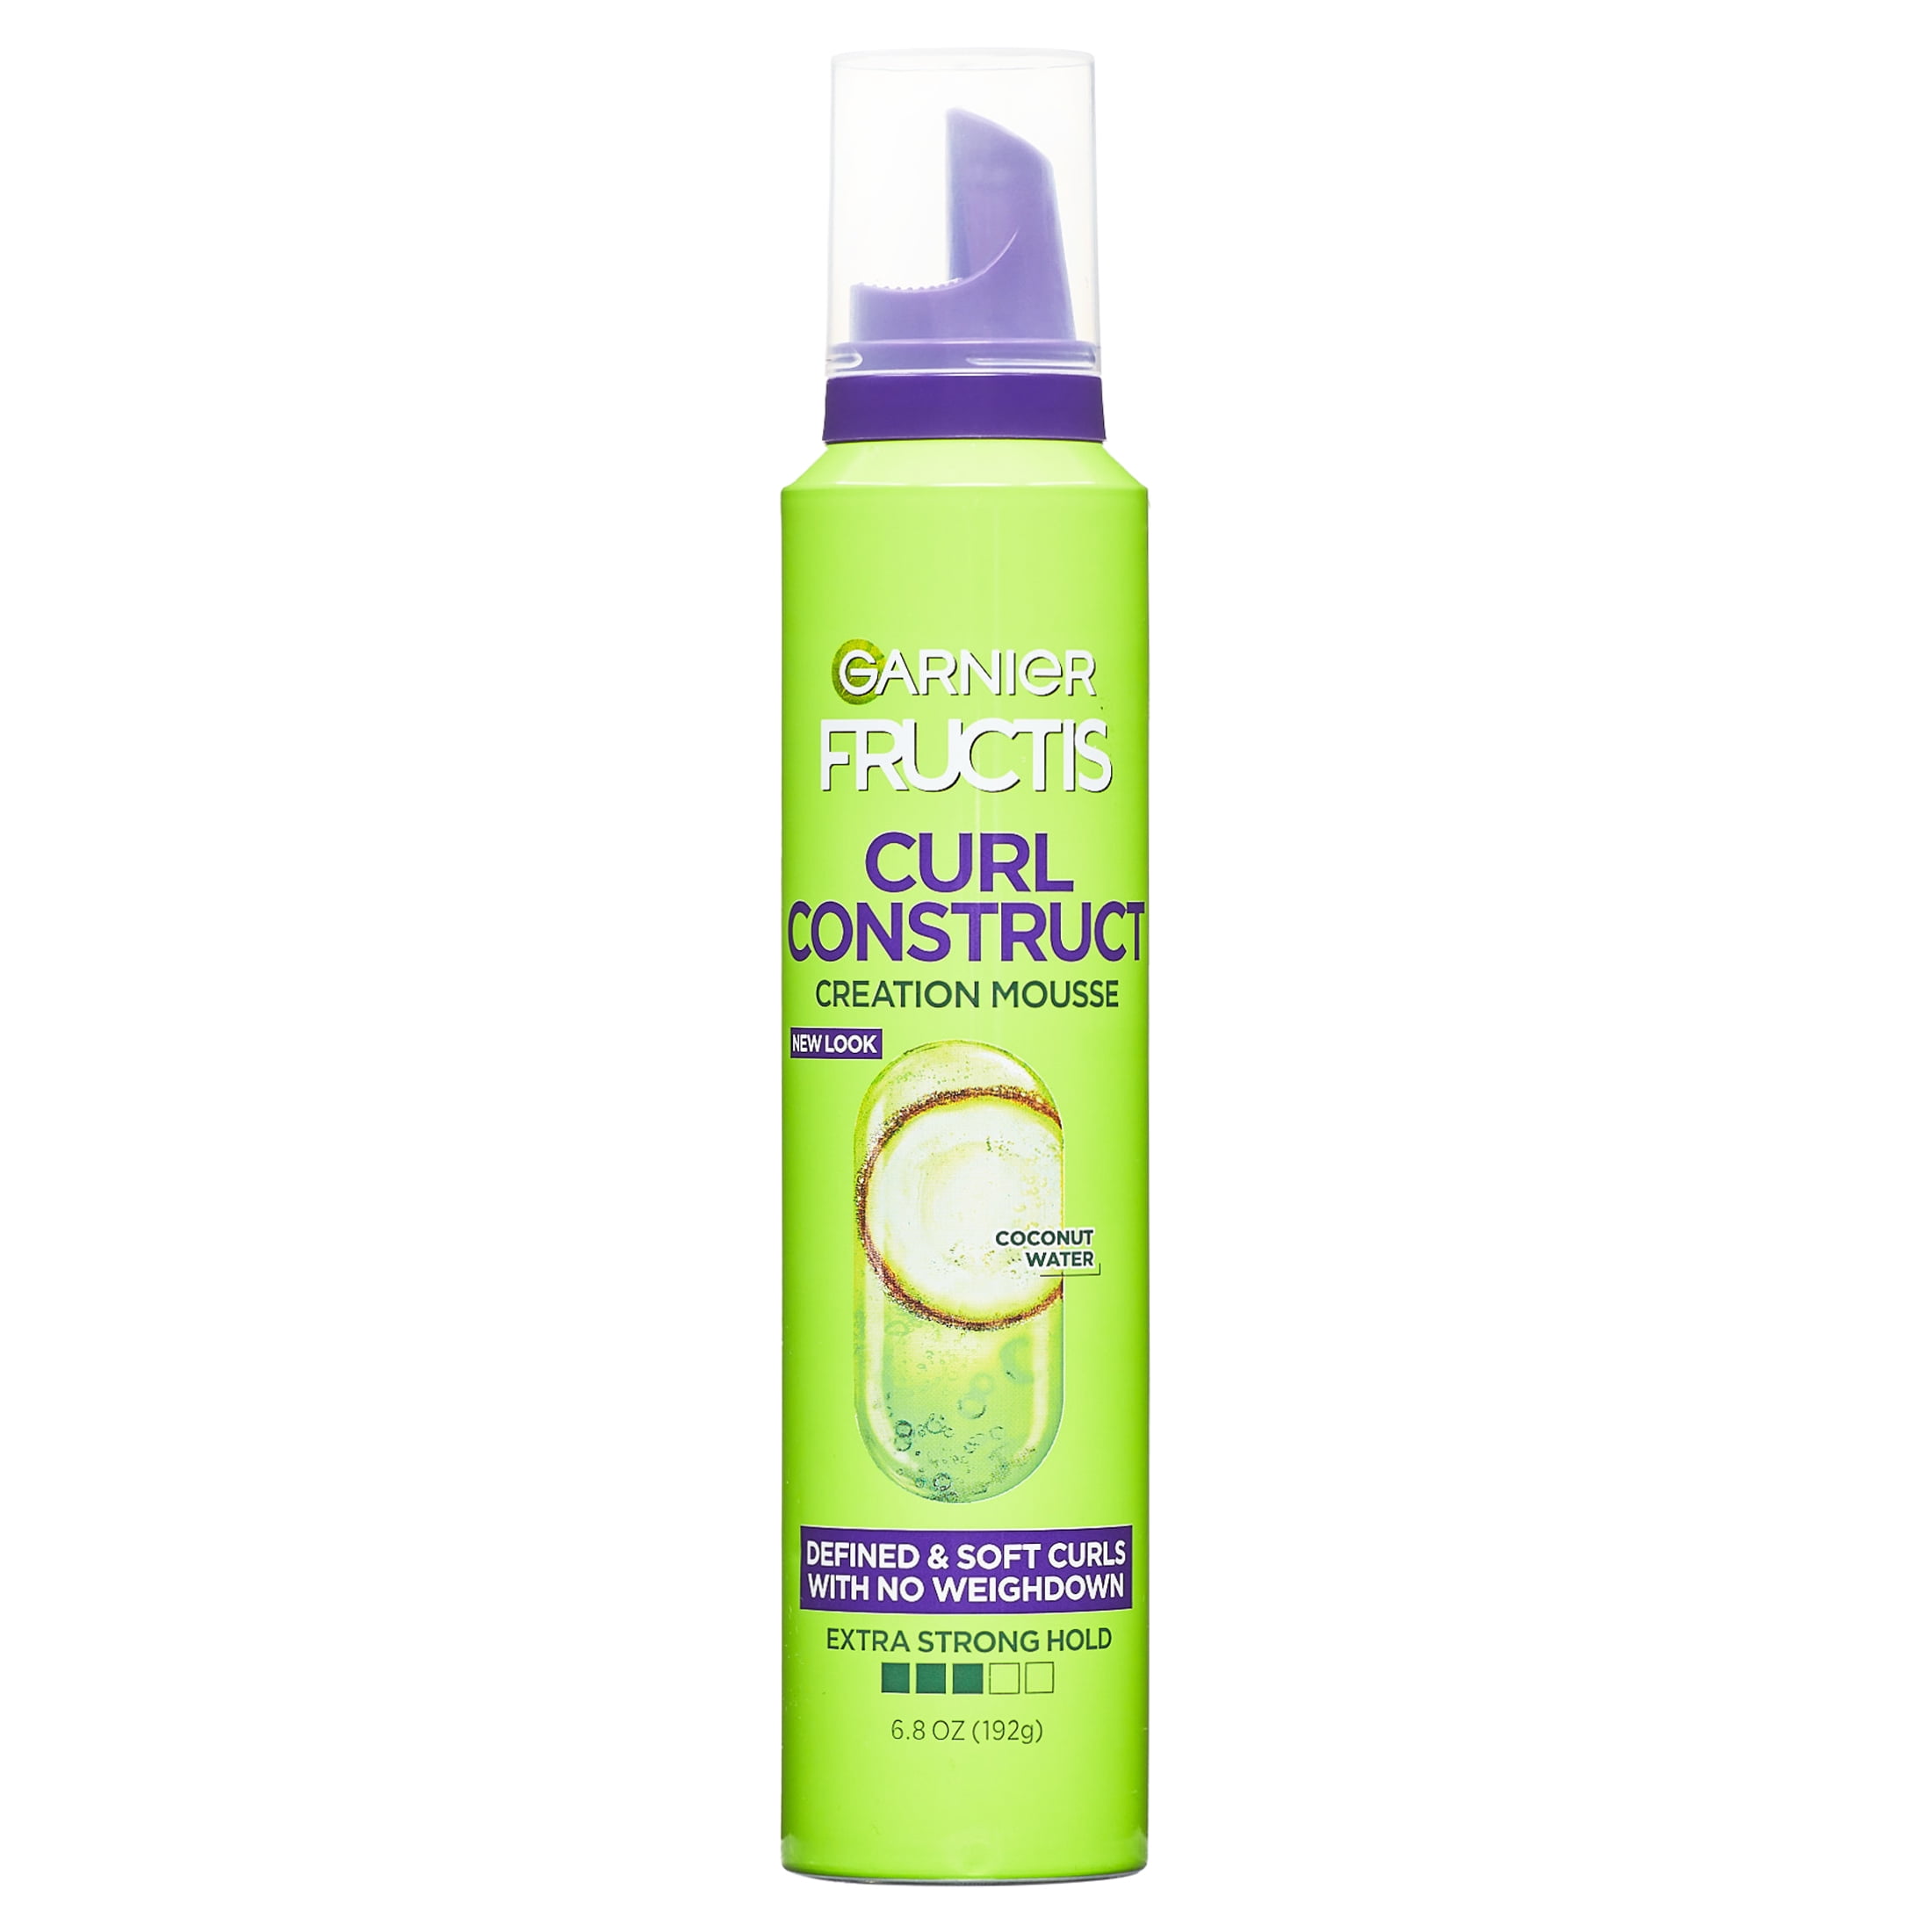 Curl Curly For 6.8 oz Hair, Fructis Mousse, Style Creation Construct Garnier